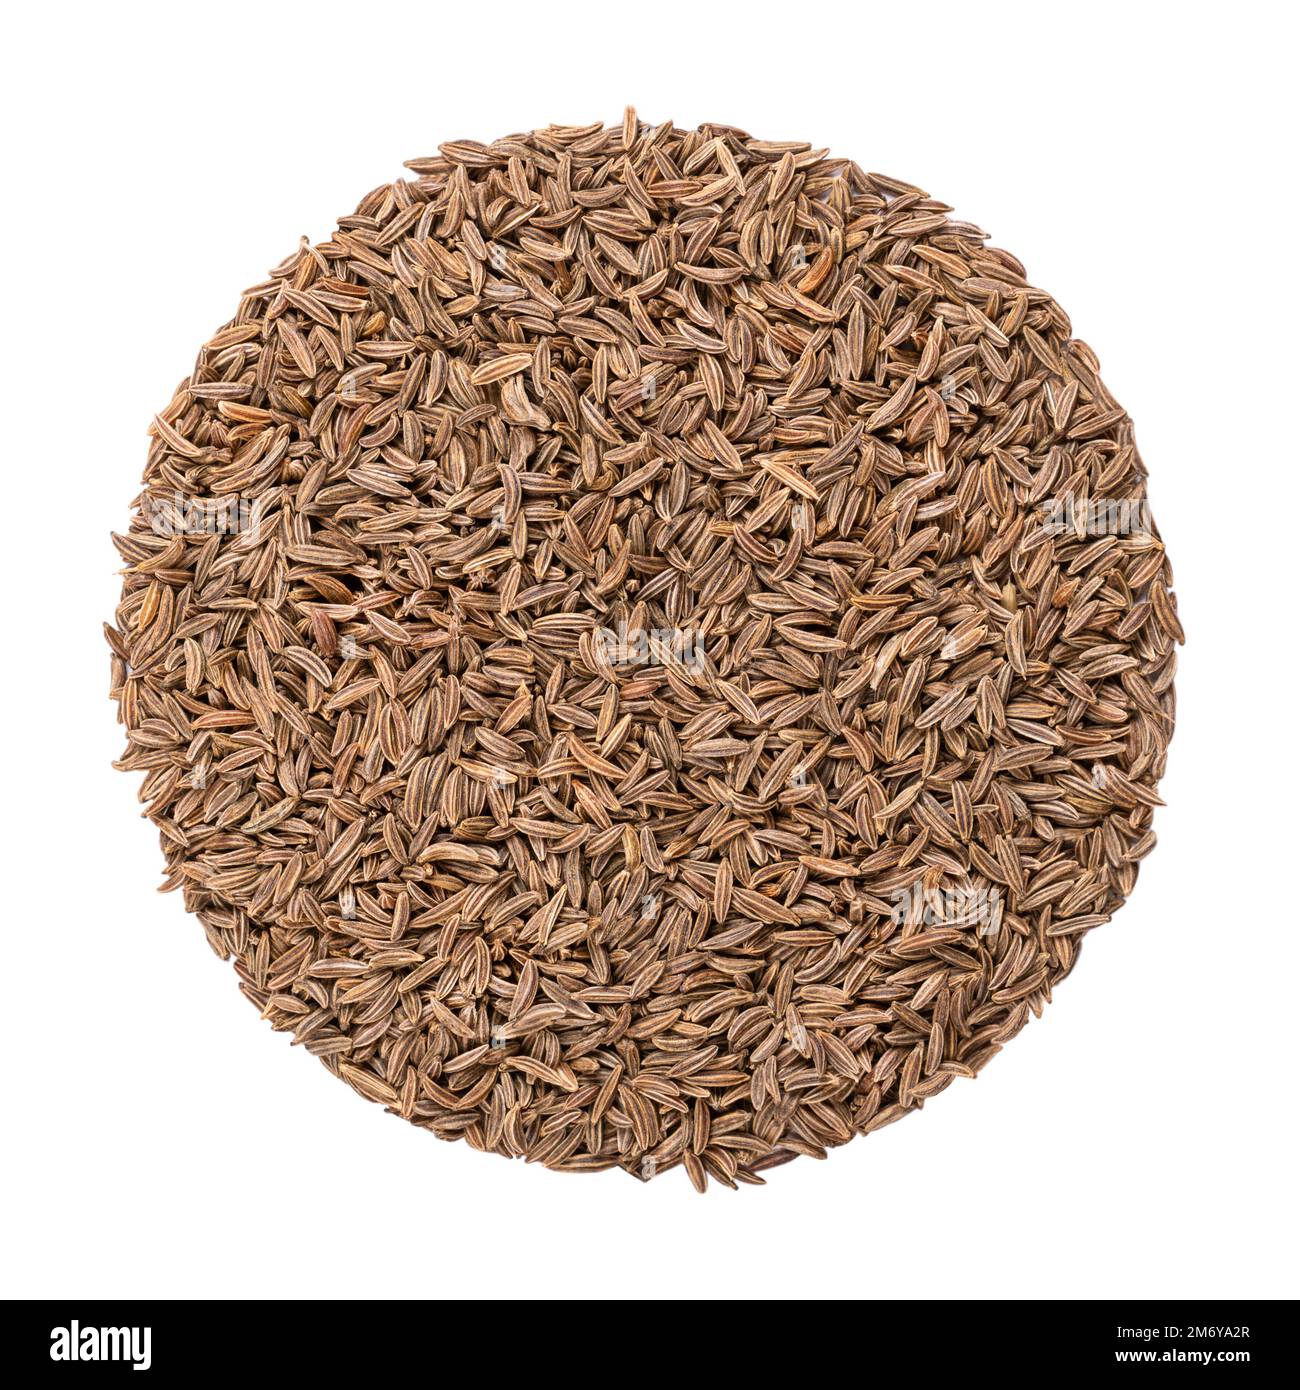 Caraway seeds, circle, close-up isolated from above. Disk made of whole dried fruits of meridian fennel, known as Persian cumin, Carum carvi, a spice. Stock Photo